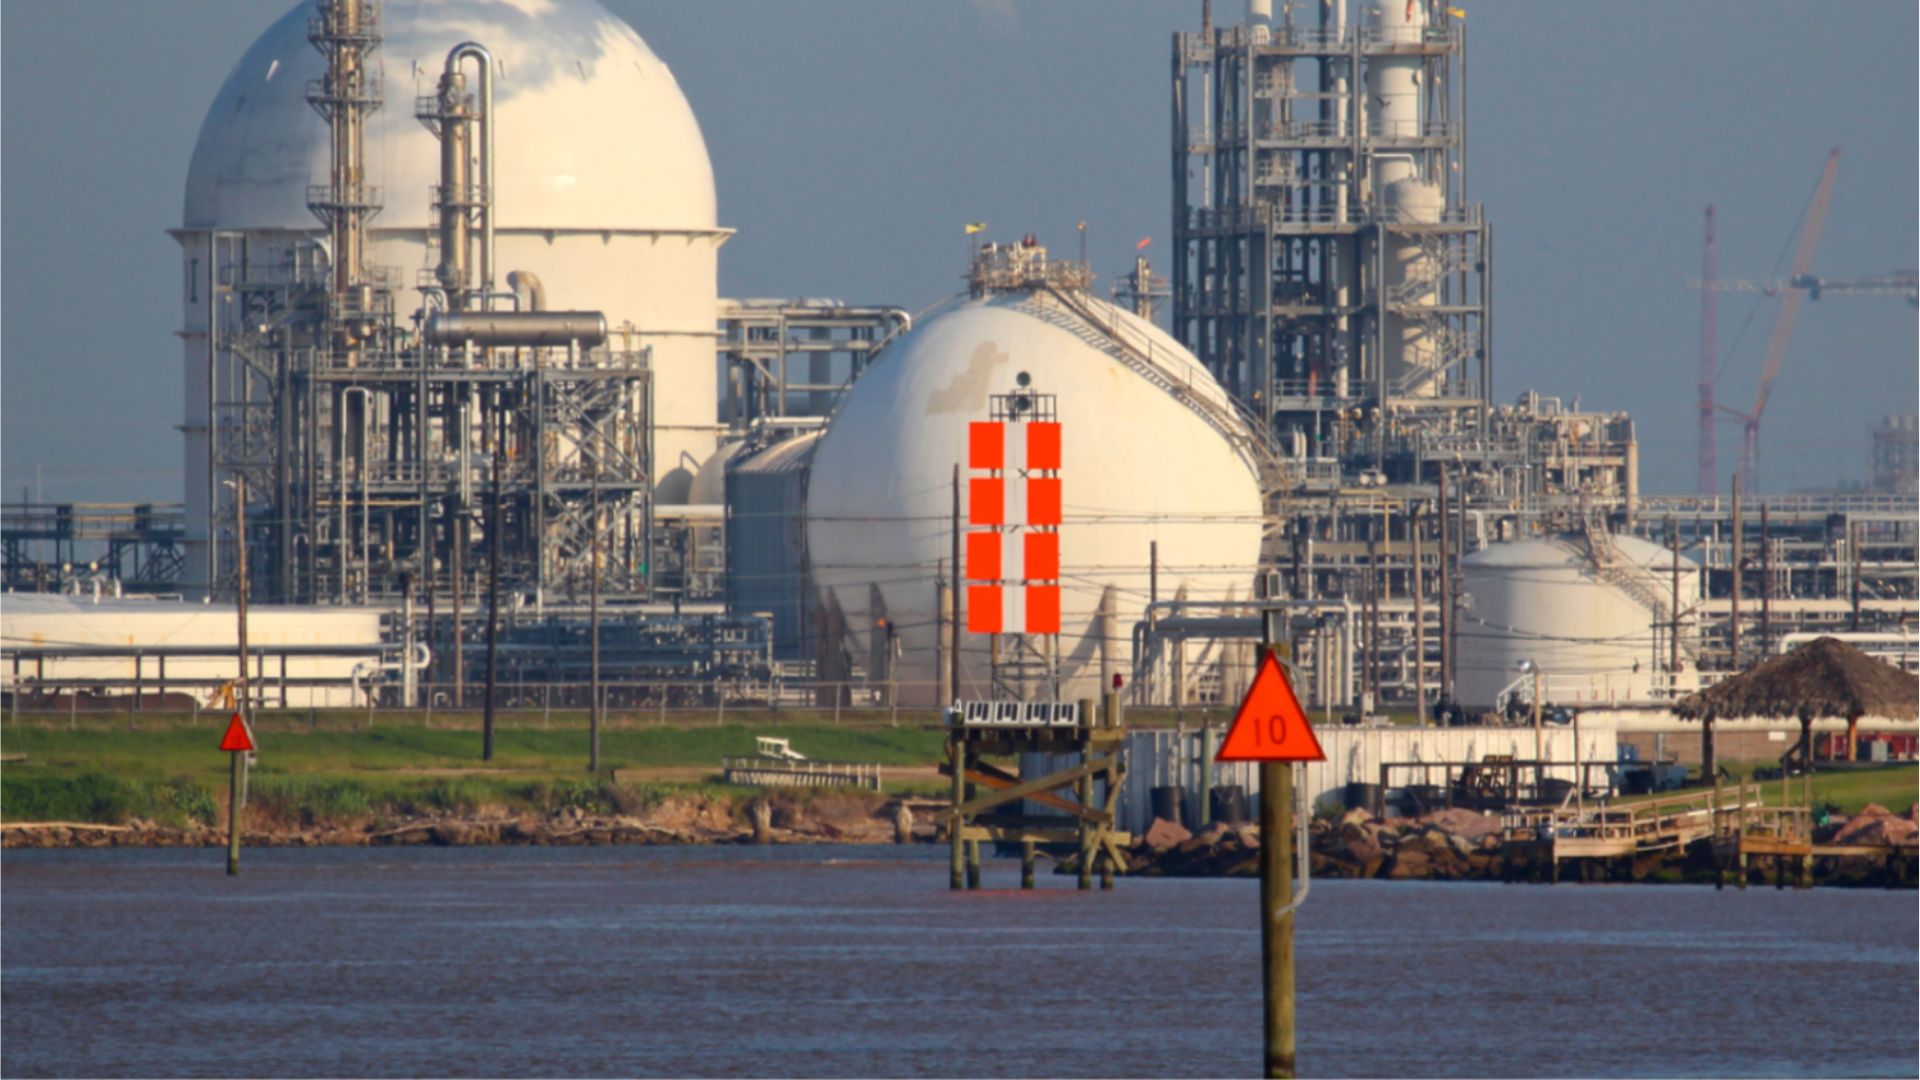 This Dow Chemical facility in Freeport, TX released toxic substances to a local waterway in 2020.